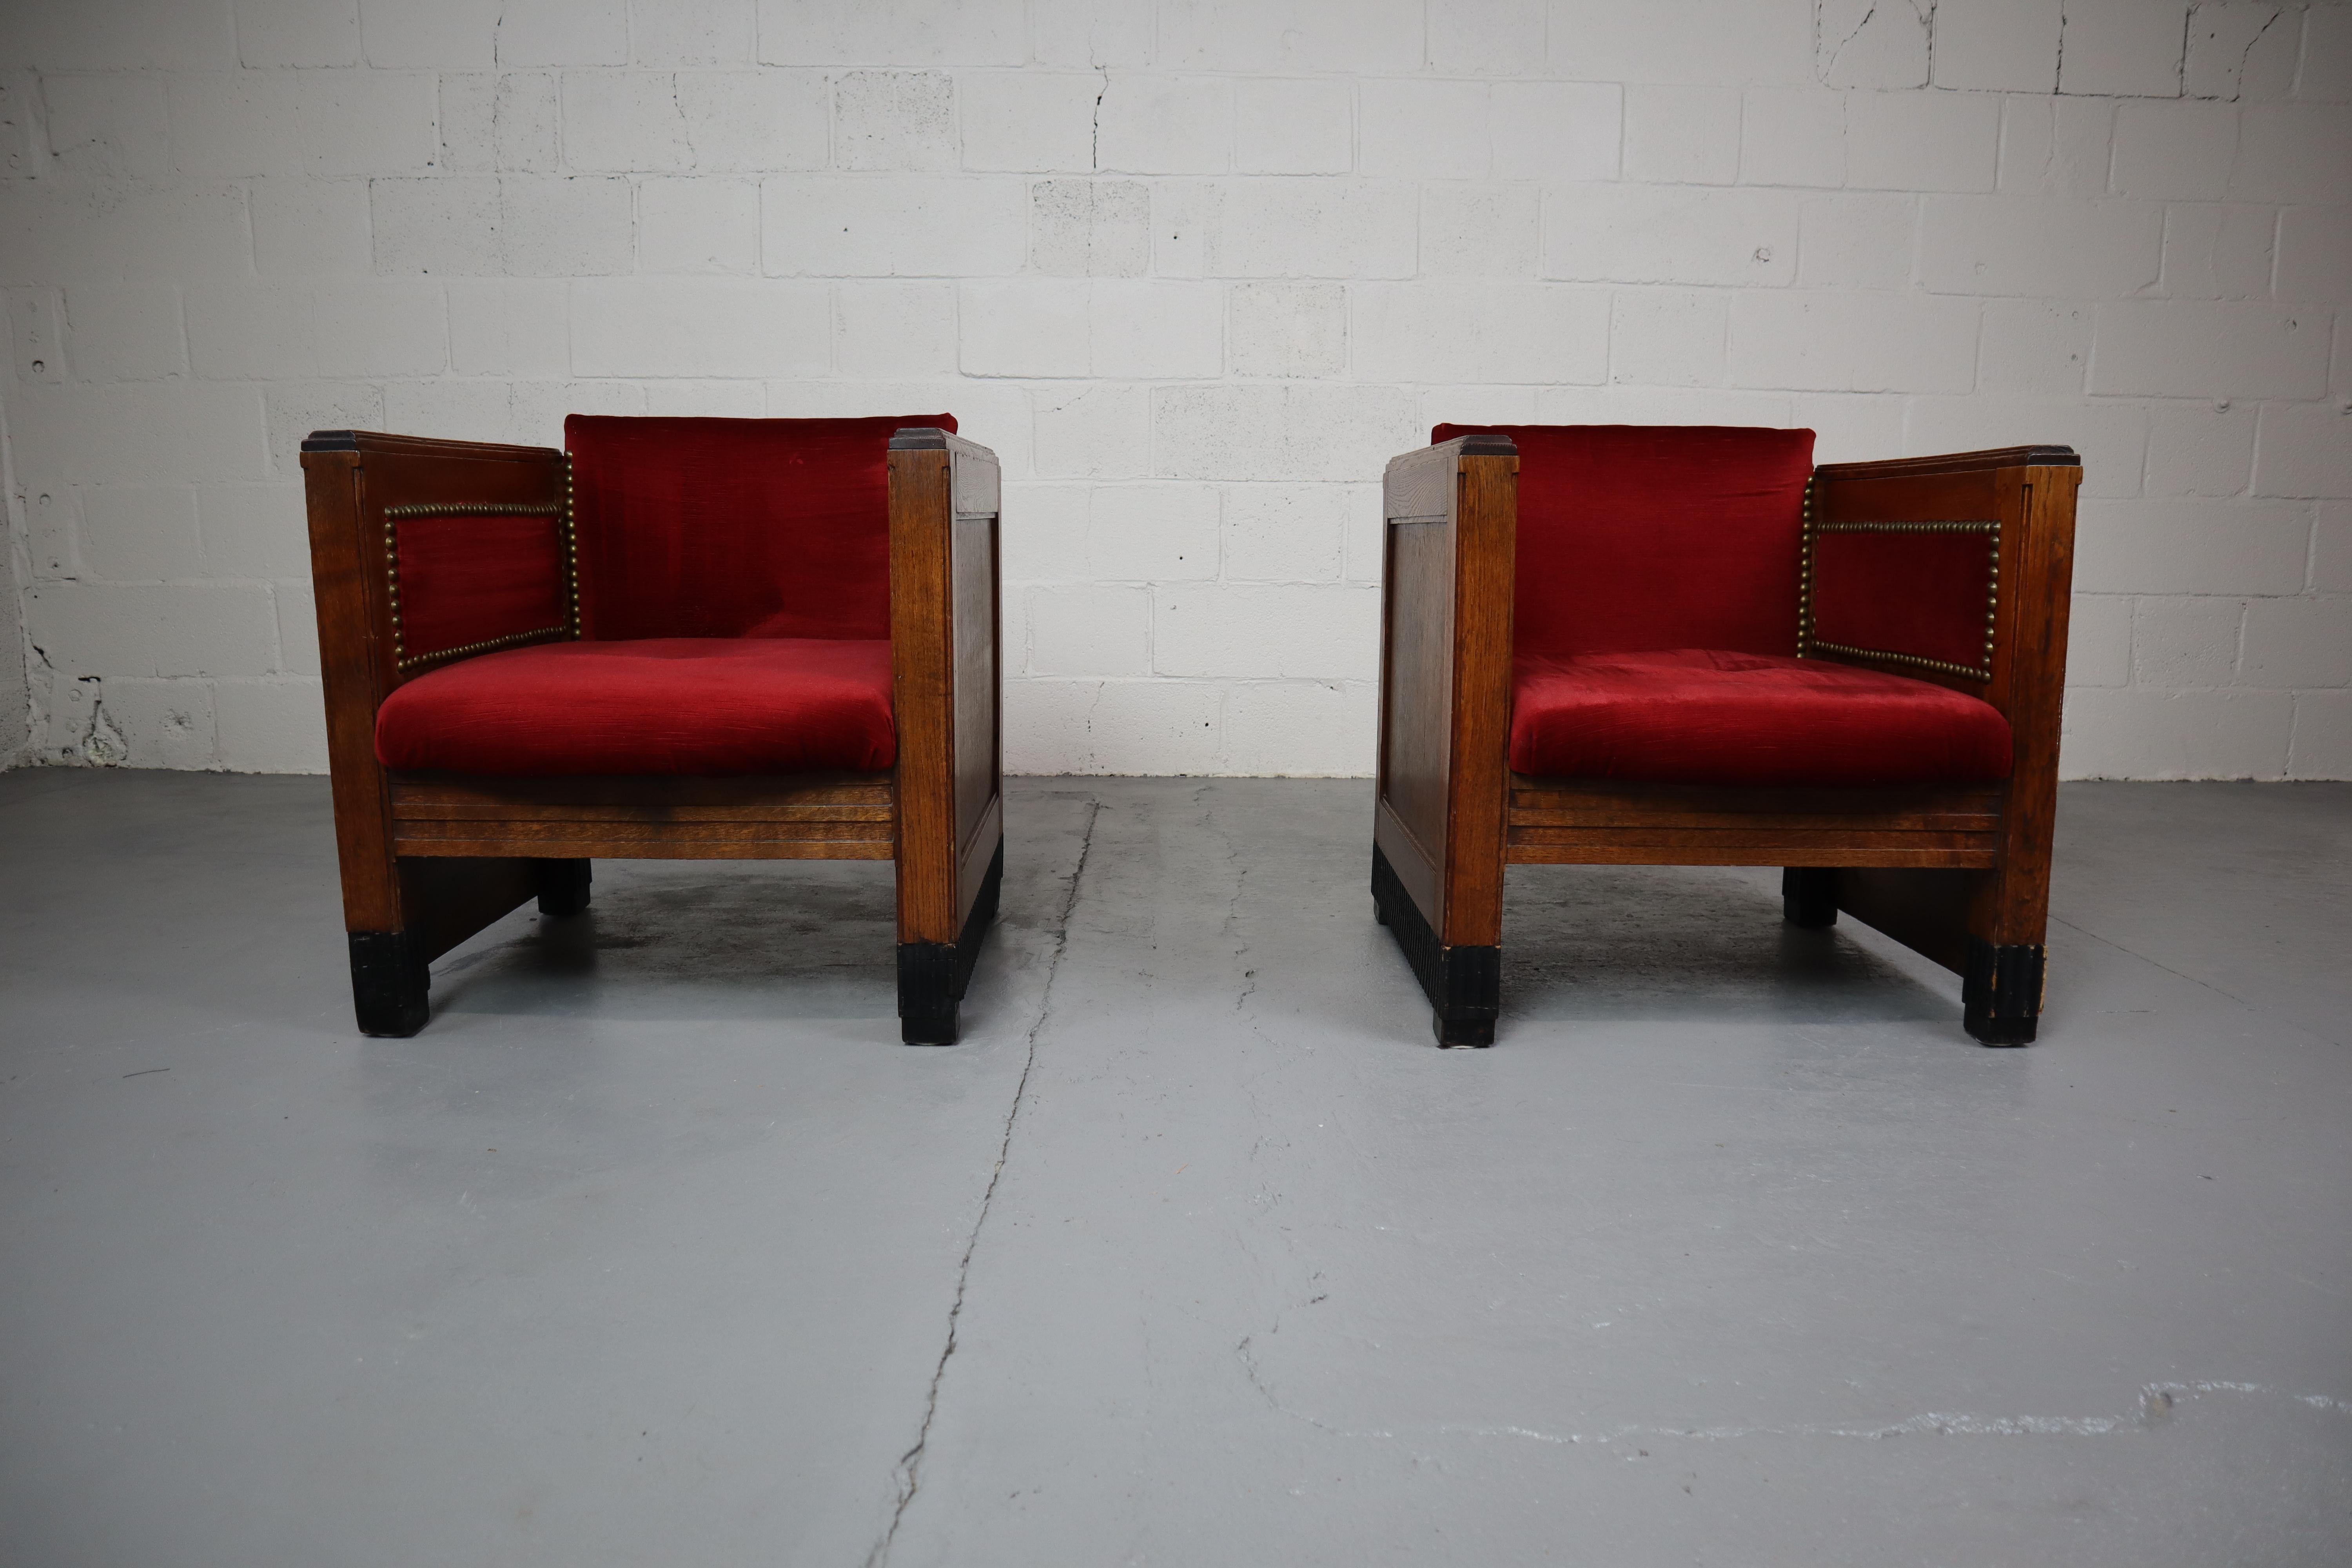 Pair of Amsterdam School seats. In solid oak and red velour upholstery. circa 1925.
The seats were reupholstered some 30 years ago.
There are some missing pieces on the lower black lacquered wooden edge.
Measures: 70 x 68 x 65 cm.
Seat height: